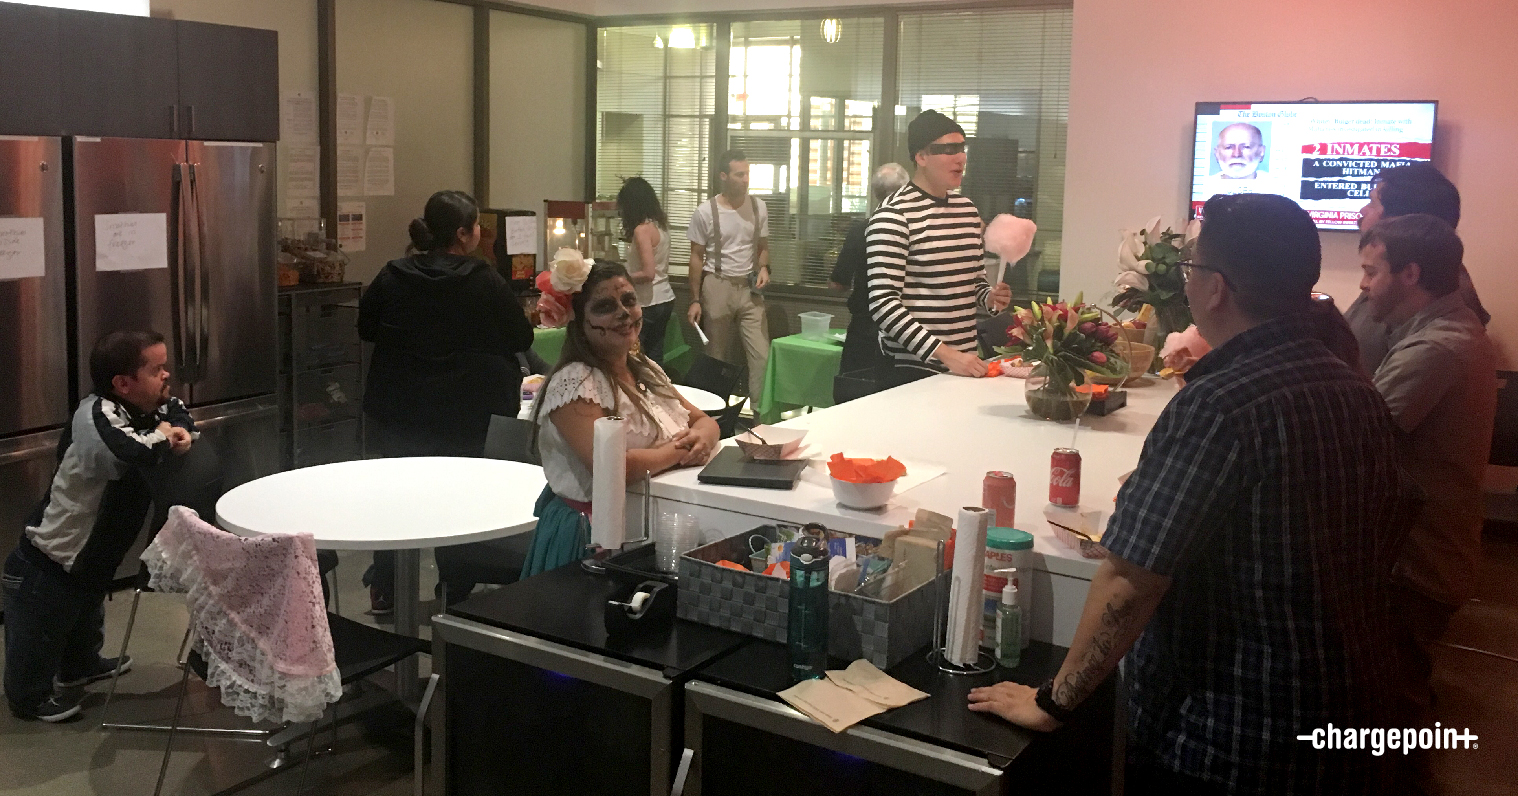 On Halloween, meetings are a bit different at ChargePoint